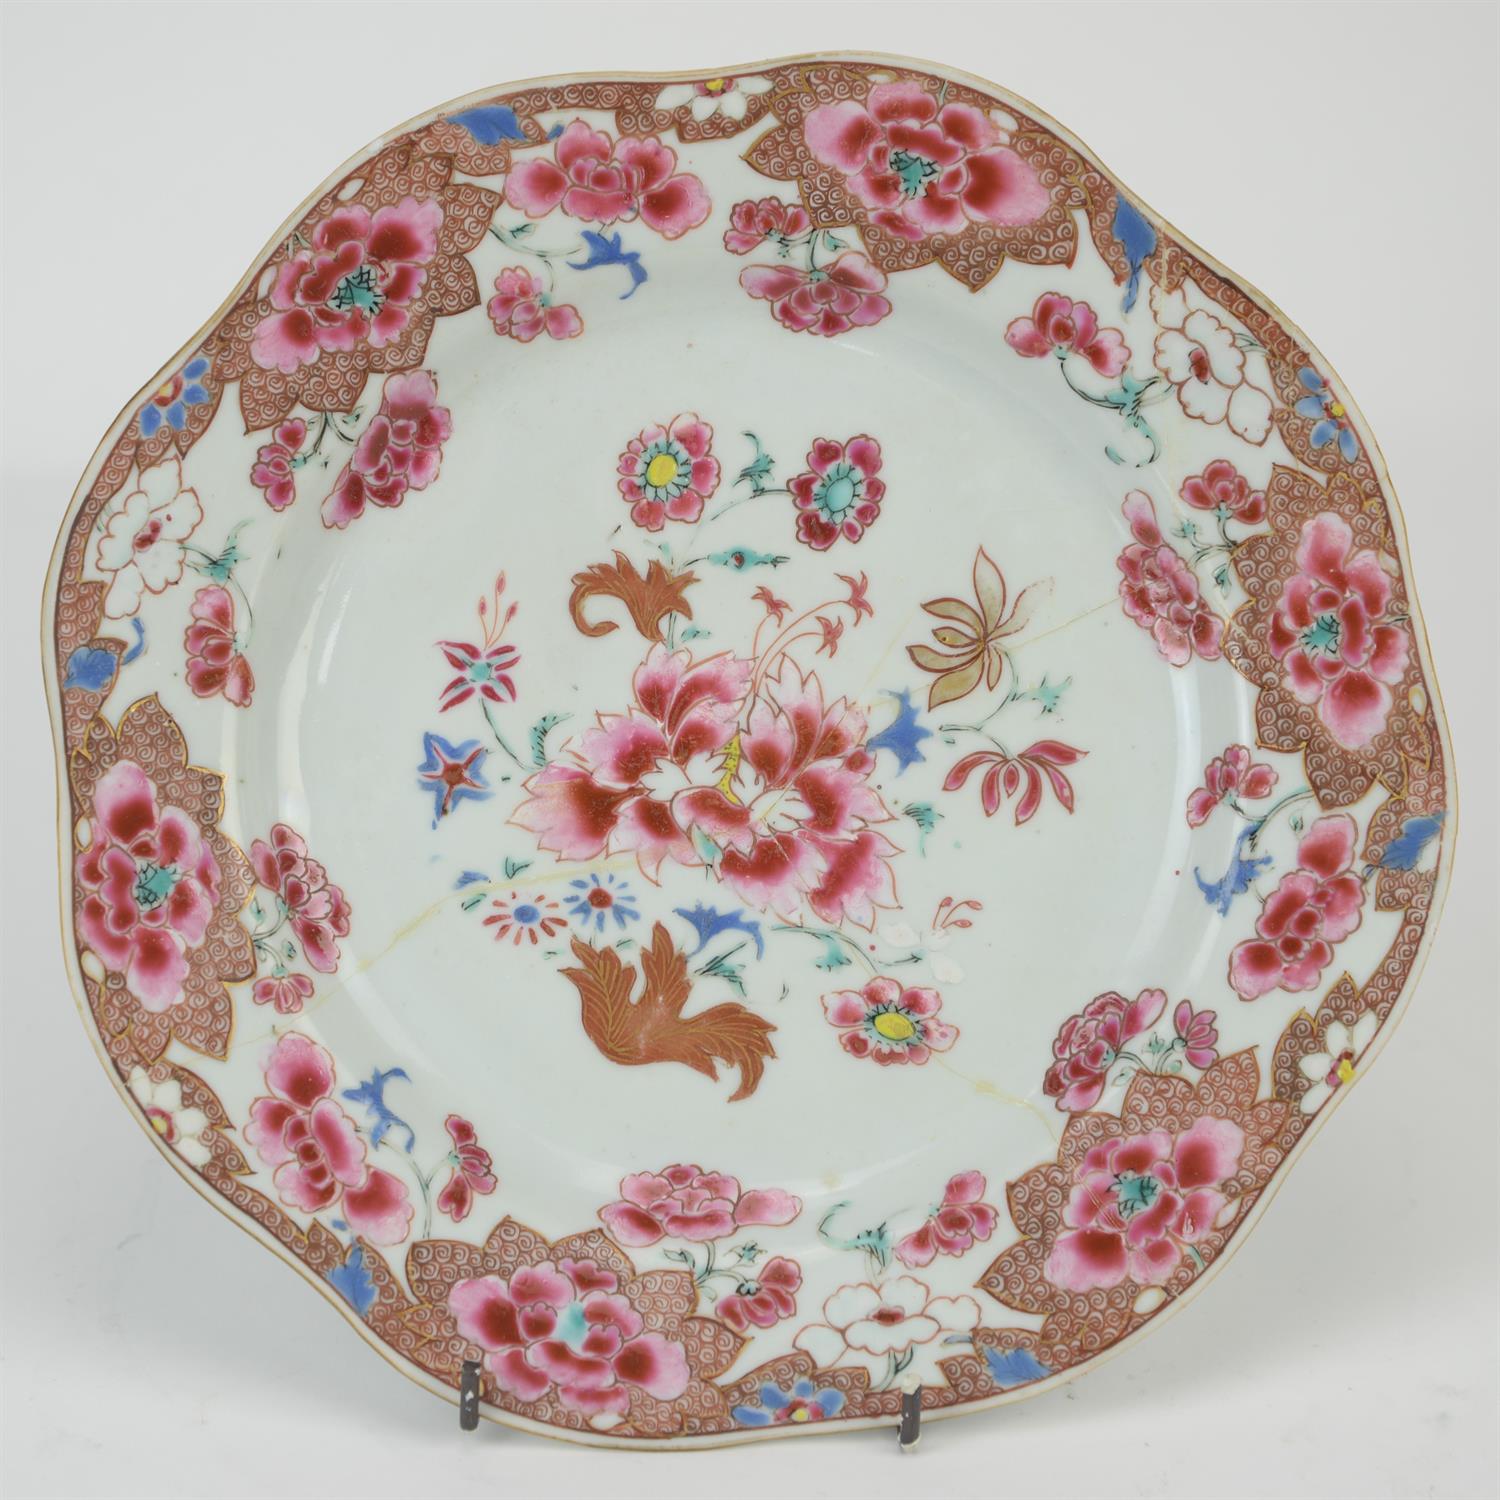 Eight famille rose dishes; each one decorated with floral designs and about 22.5 cm diameter - Image 7 of 14